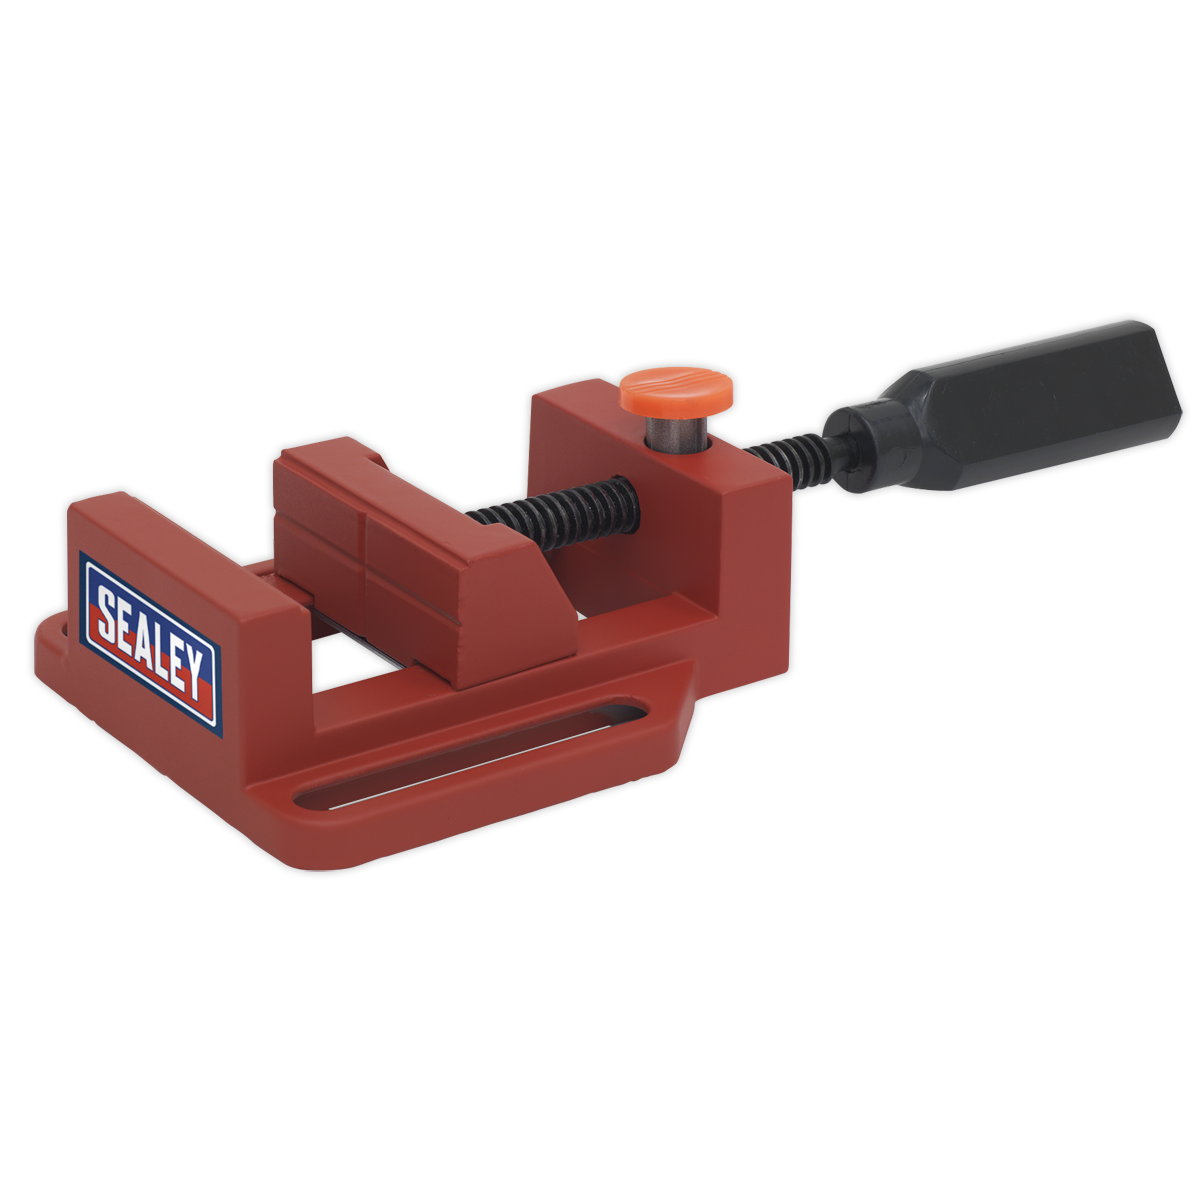 Supplied with 65mm drill vice which mounts onto the base to secure the workpiece.